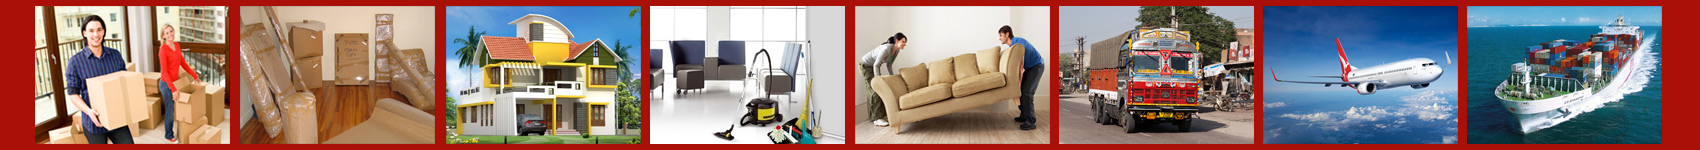 packers and movers in Chandigarh